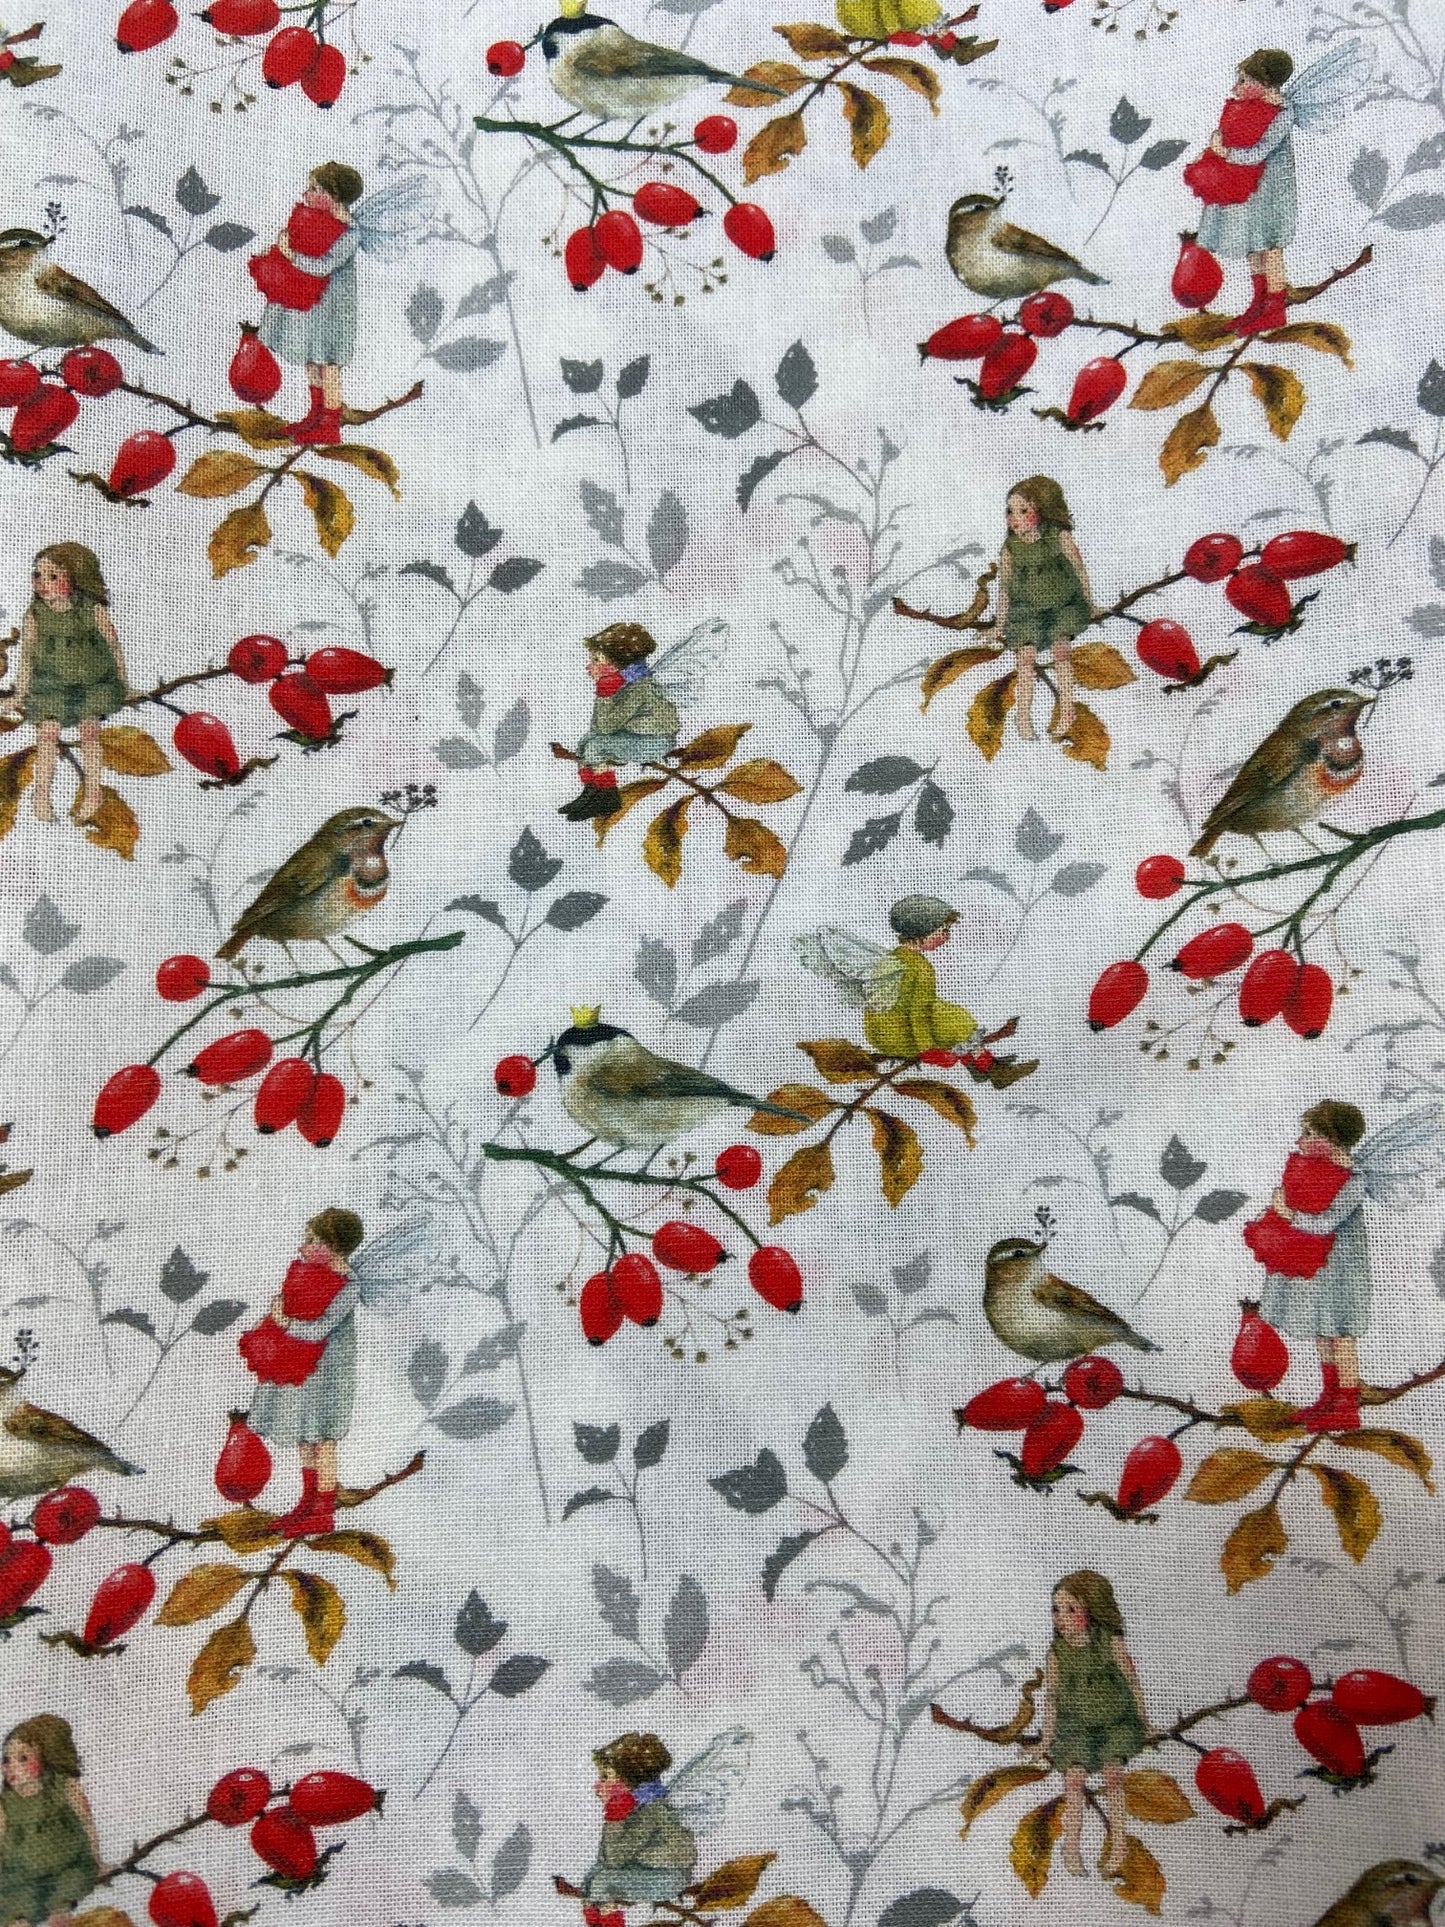 Rosehips and Robins